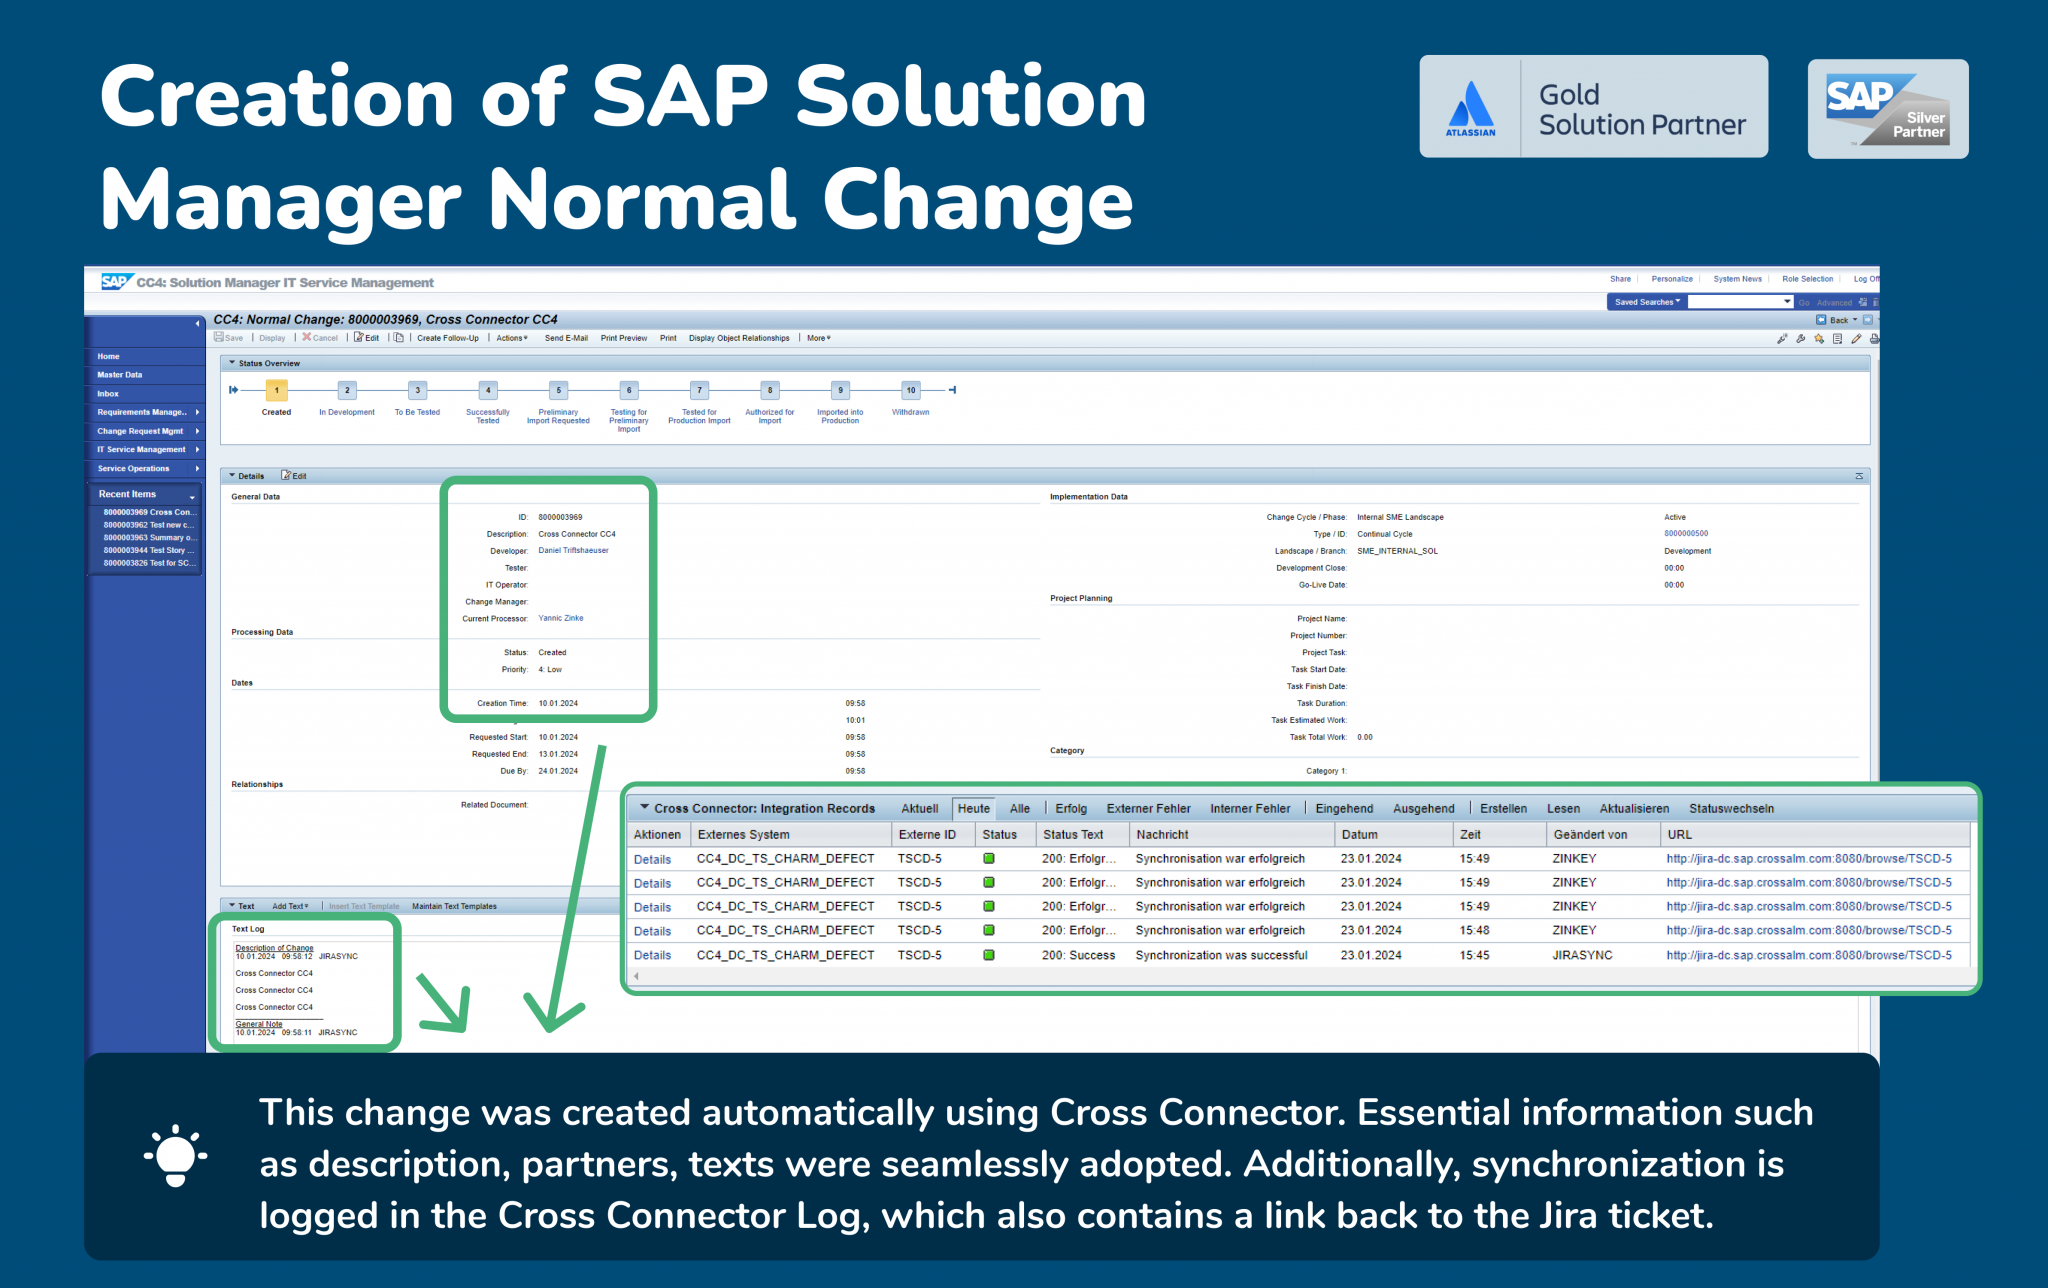 Creation of SAP Solution Manager Normal Change Normal Change